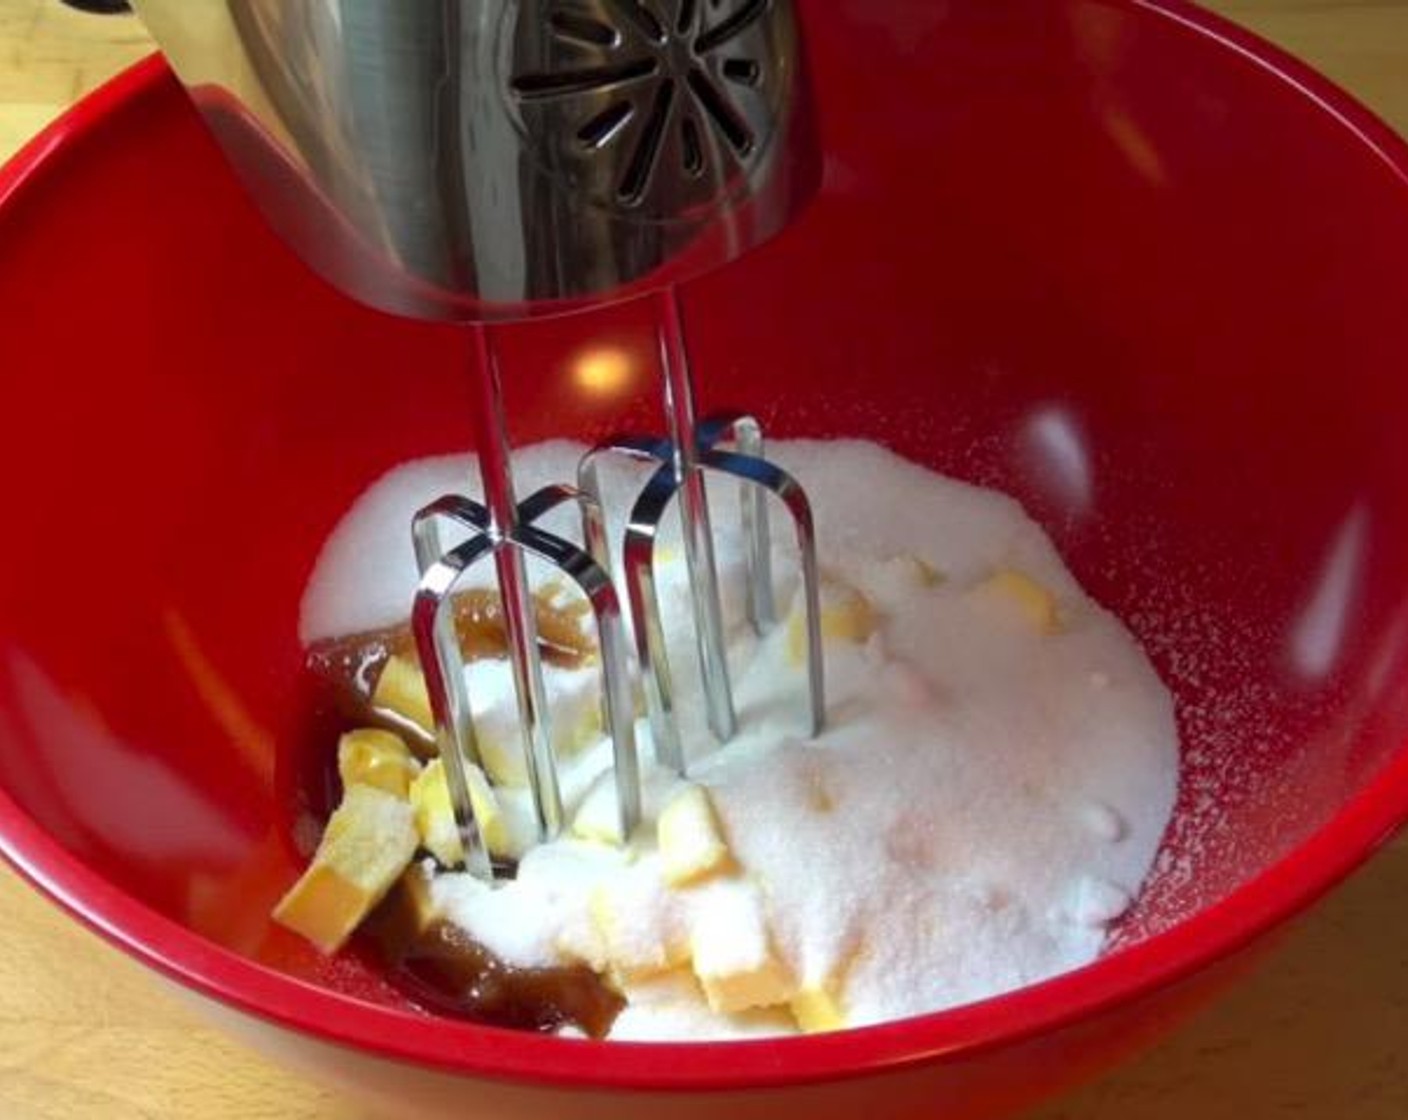 step 1 In a large mixing bowl, combine Butter (2/3 cup), Caster Sugar (1 cup) and Vanilla Extract (1 tsp). Beat together until combined.